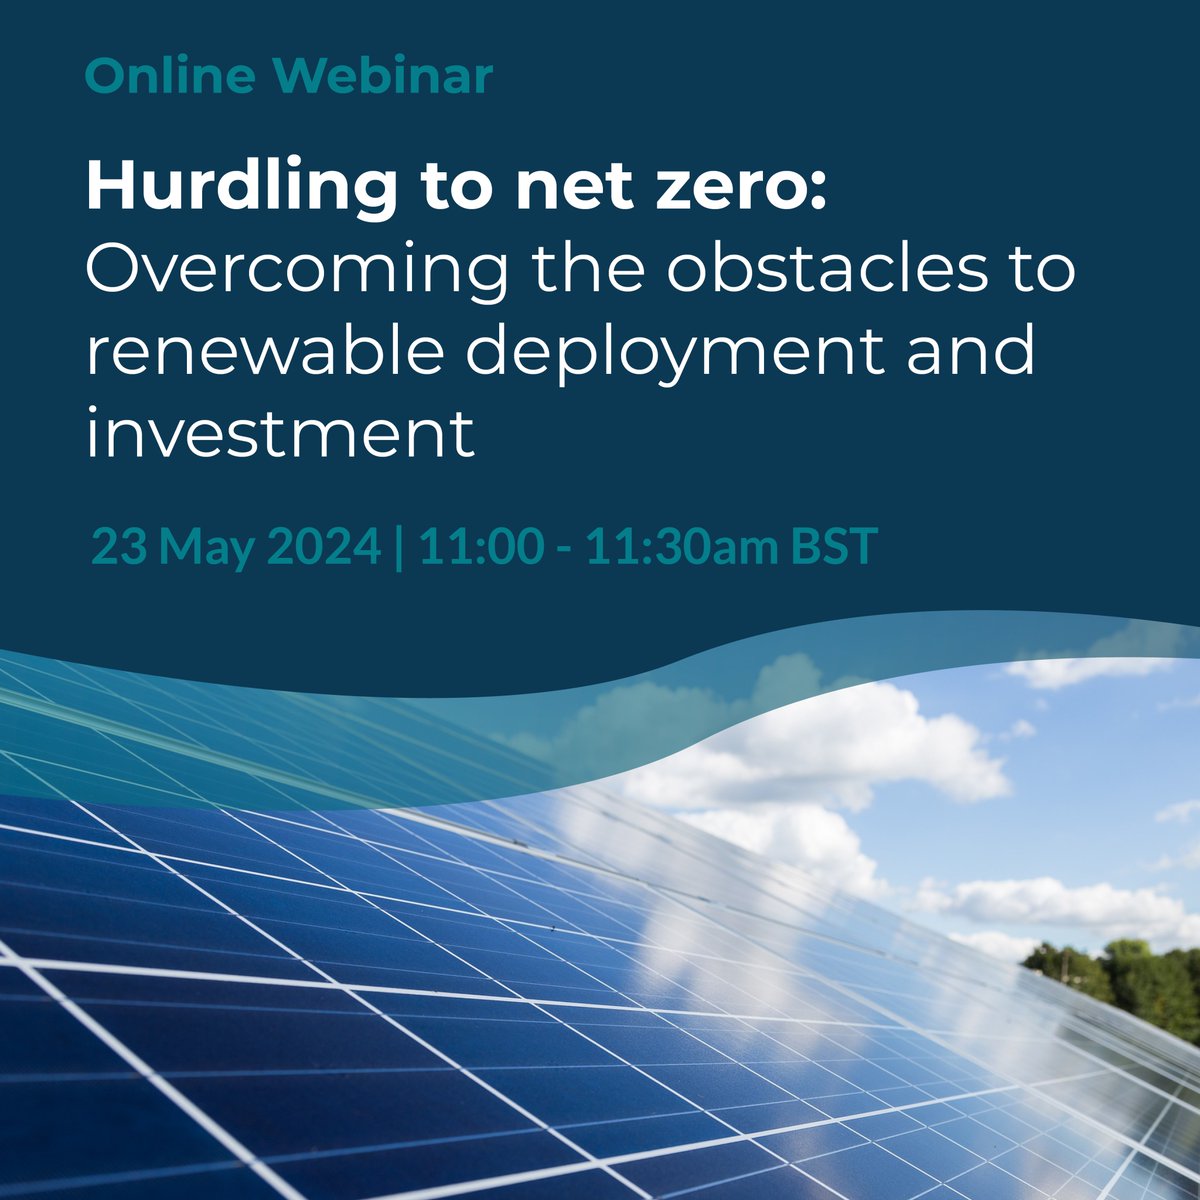 We're two weeks away from our next webinar, 'Hurdling to net zero: Overcoming the obstacles to renewable deployment and investment', on 23 May 2024. We will discuss some of the challenges in the rollout of renewables to meet the UK's net zero targets. register.gotowebinar.com/register/13748…